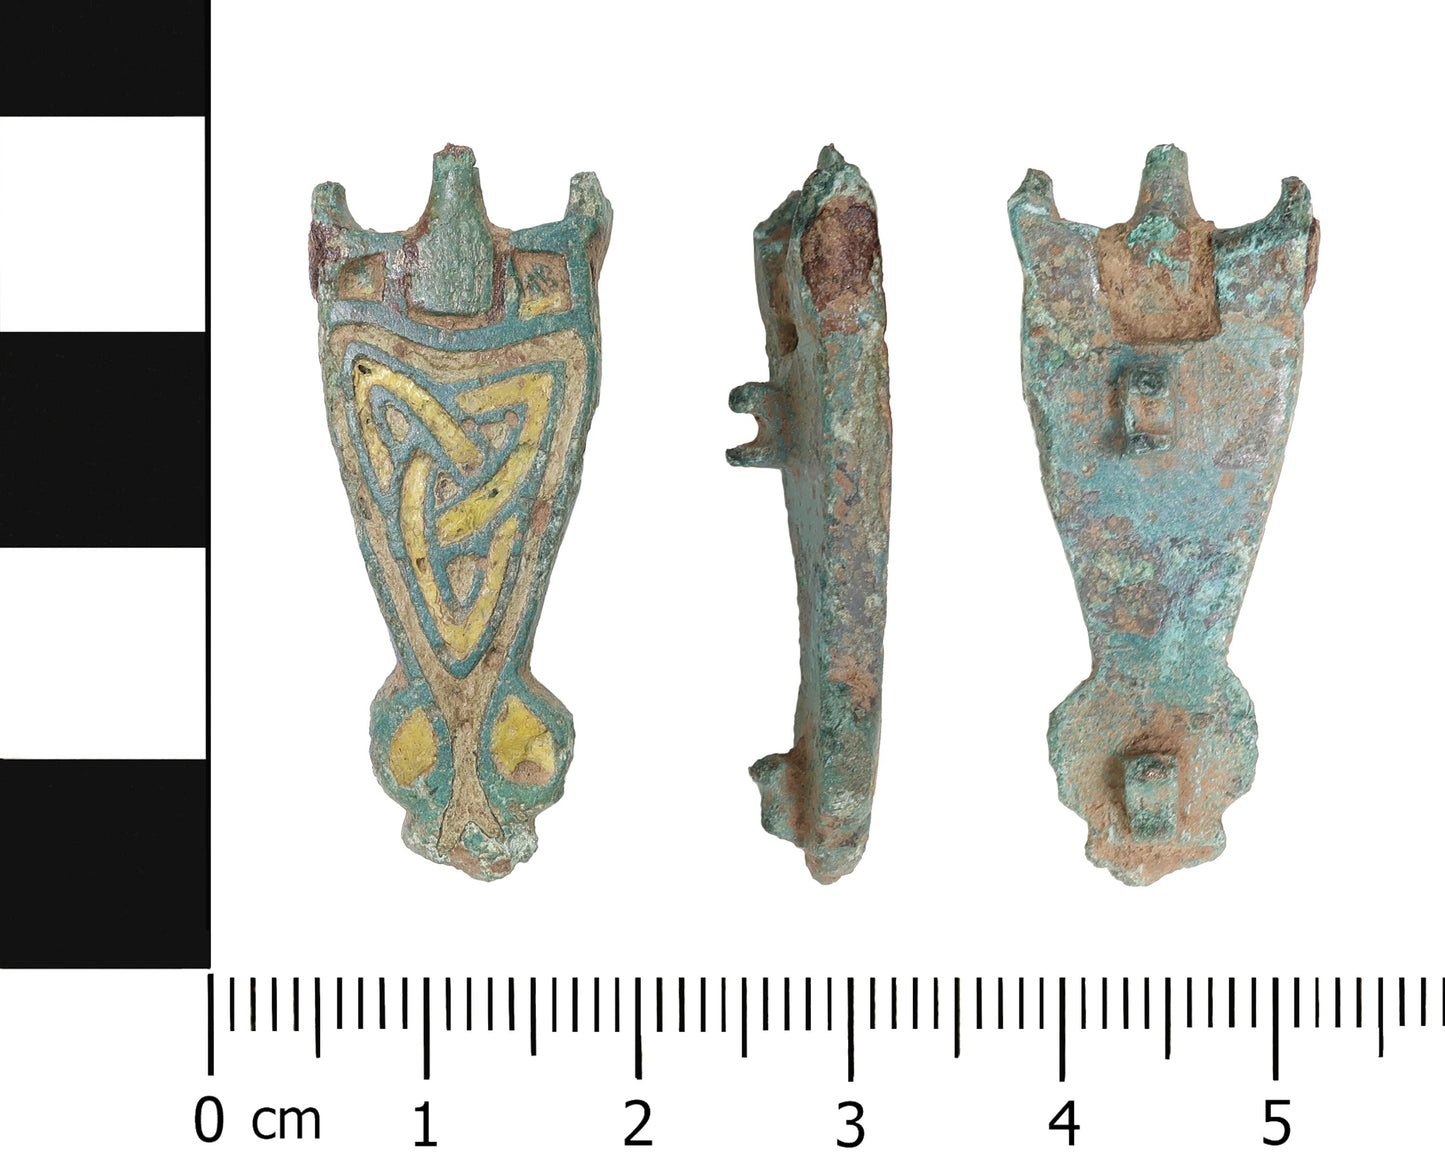 Medieval Buckle with Trisquetra